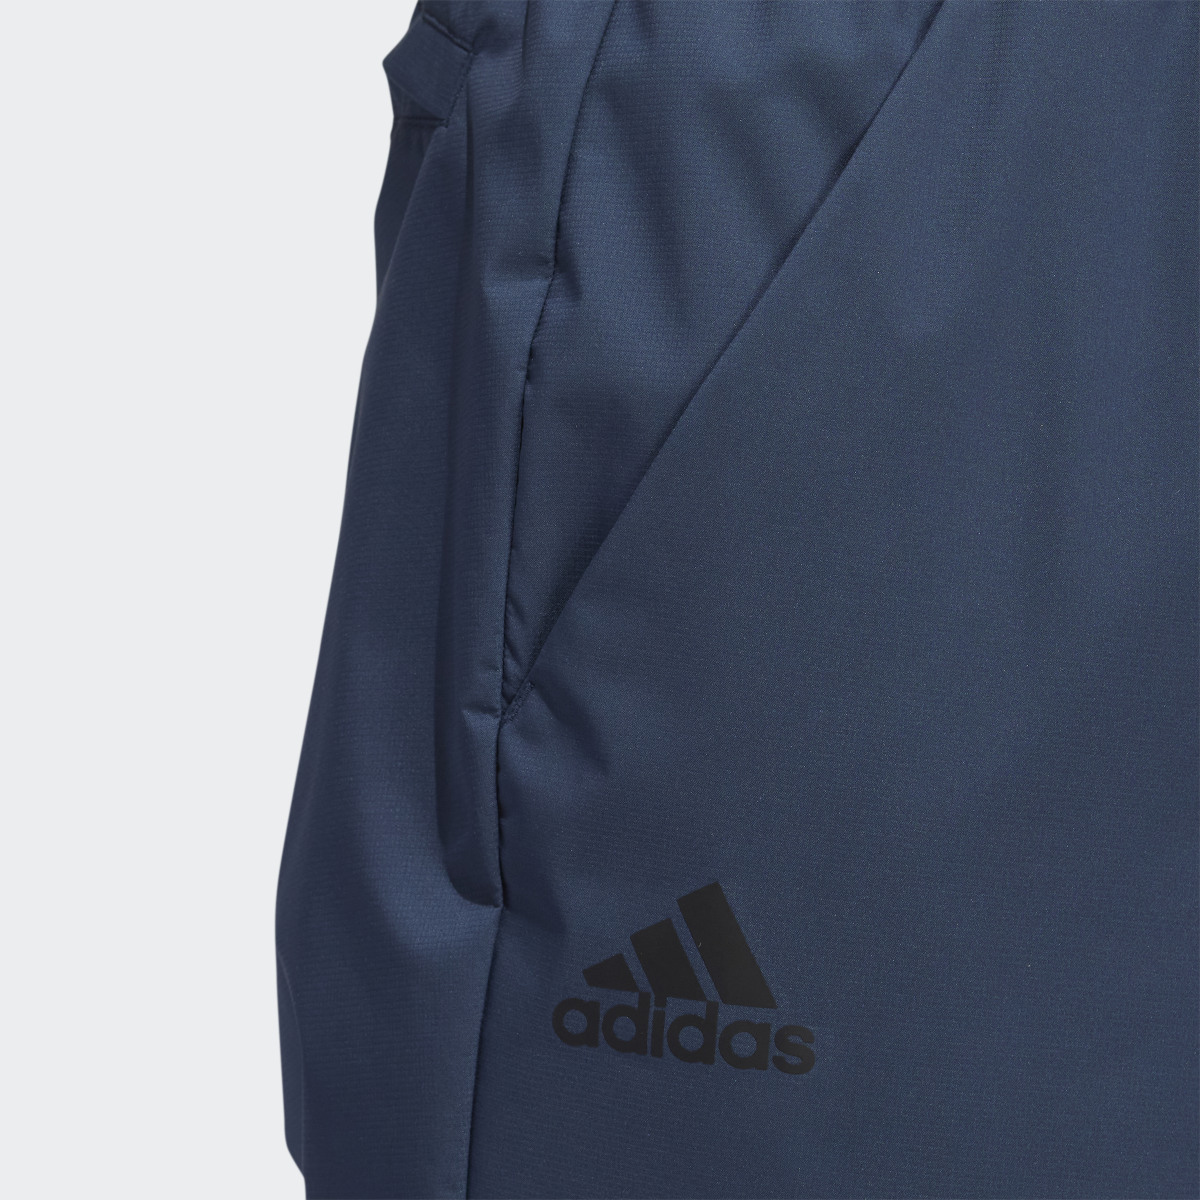 Adidas Provisional Golf Tracksuit Bottoms. 7